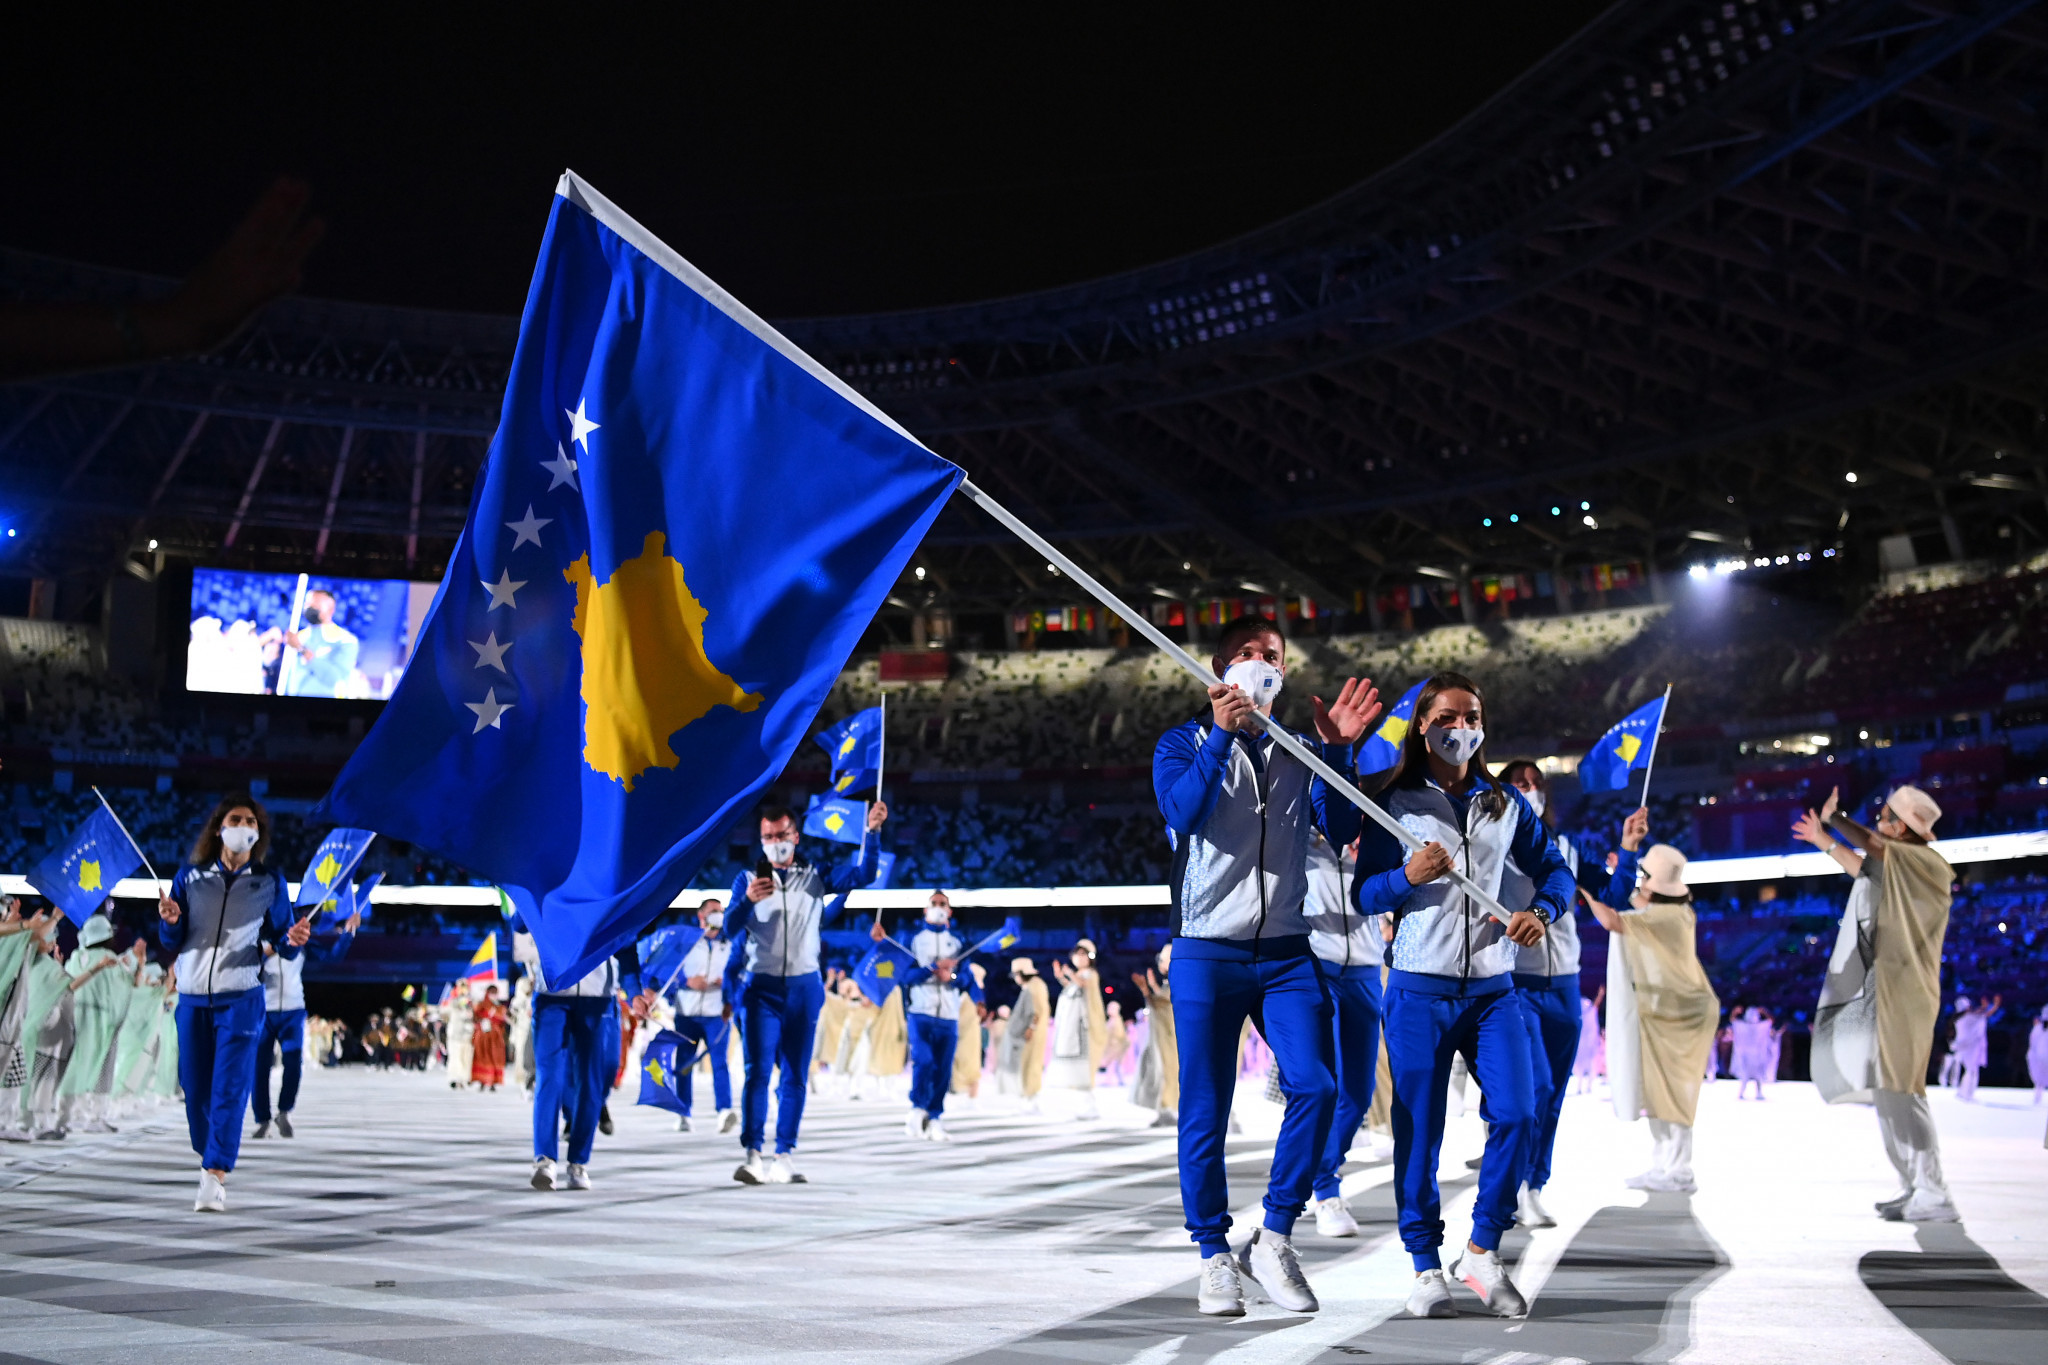 Kosovo has been recognised by the IOC since 2014, but the KOK said it is 